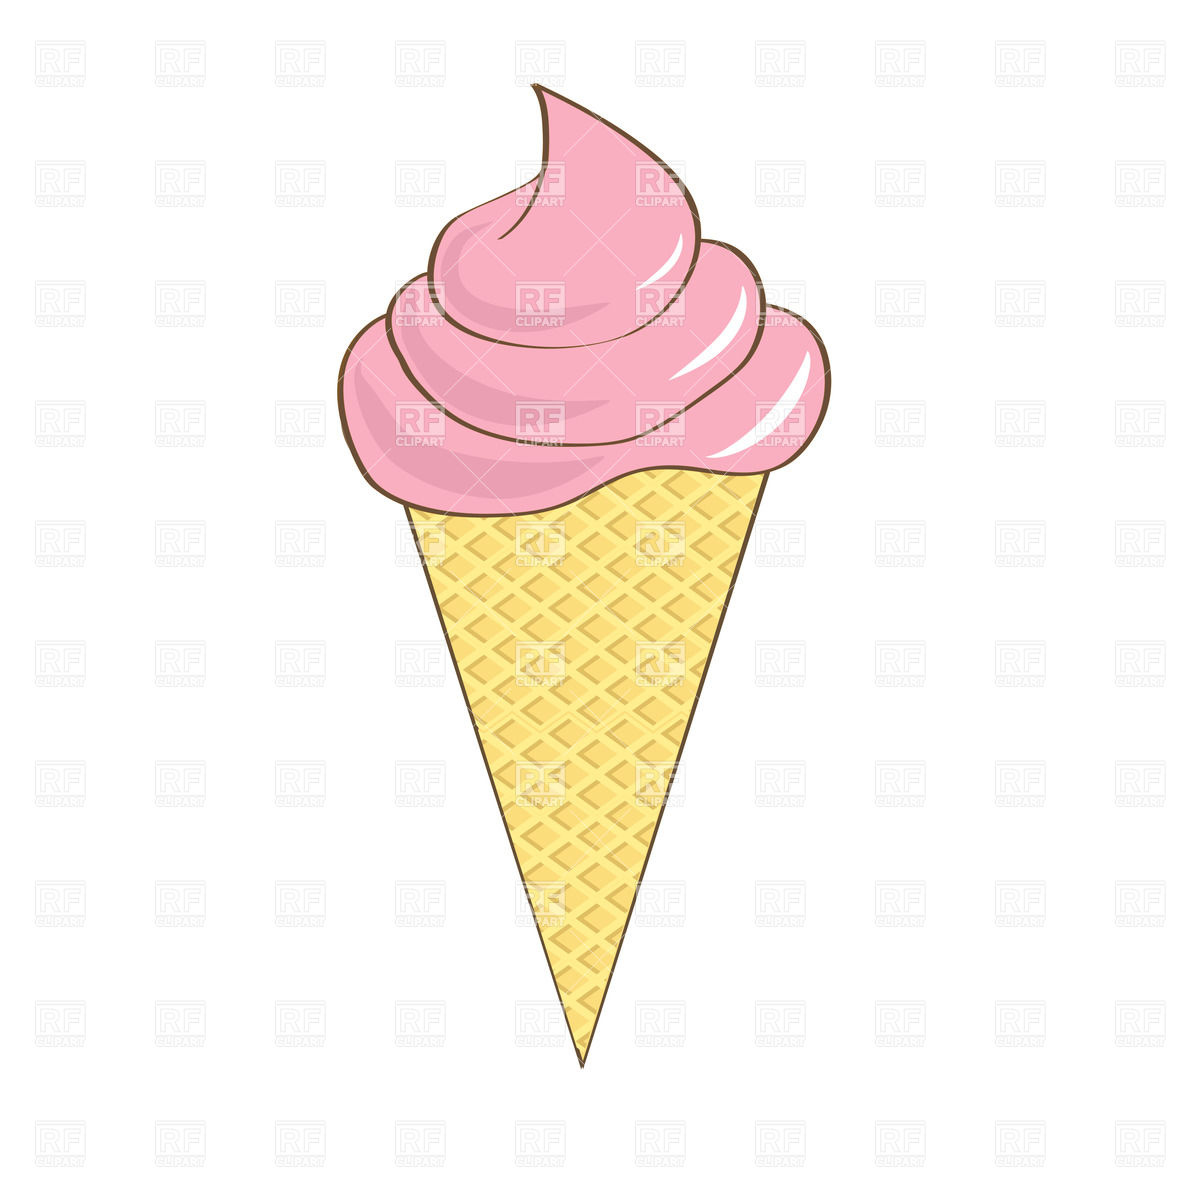 Pink Cone Soft Serve Ice Cream In Waffle Cup Download Royalty Free    